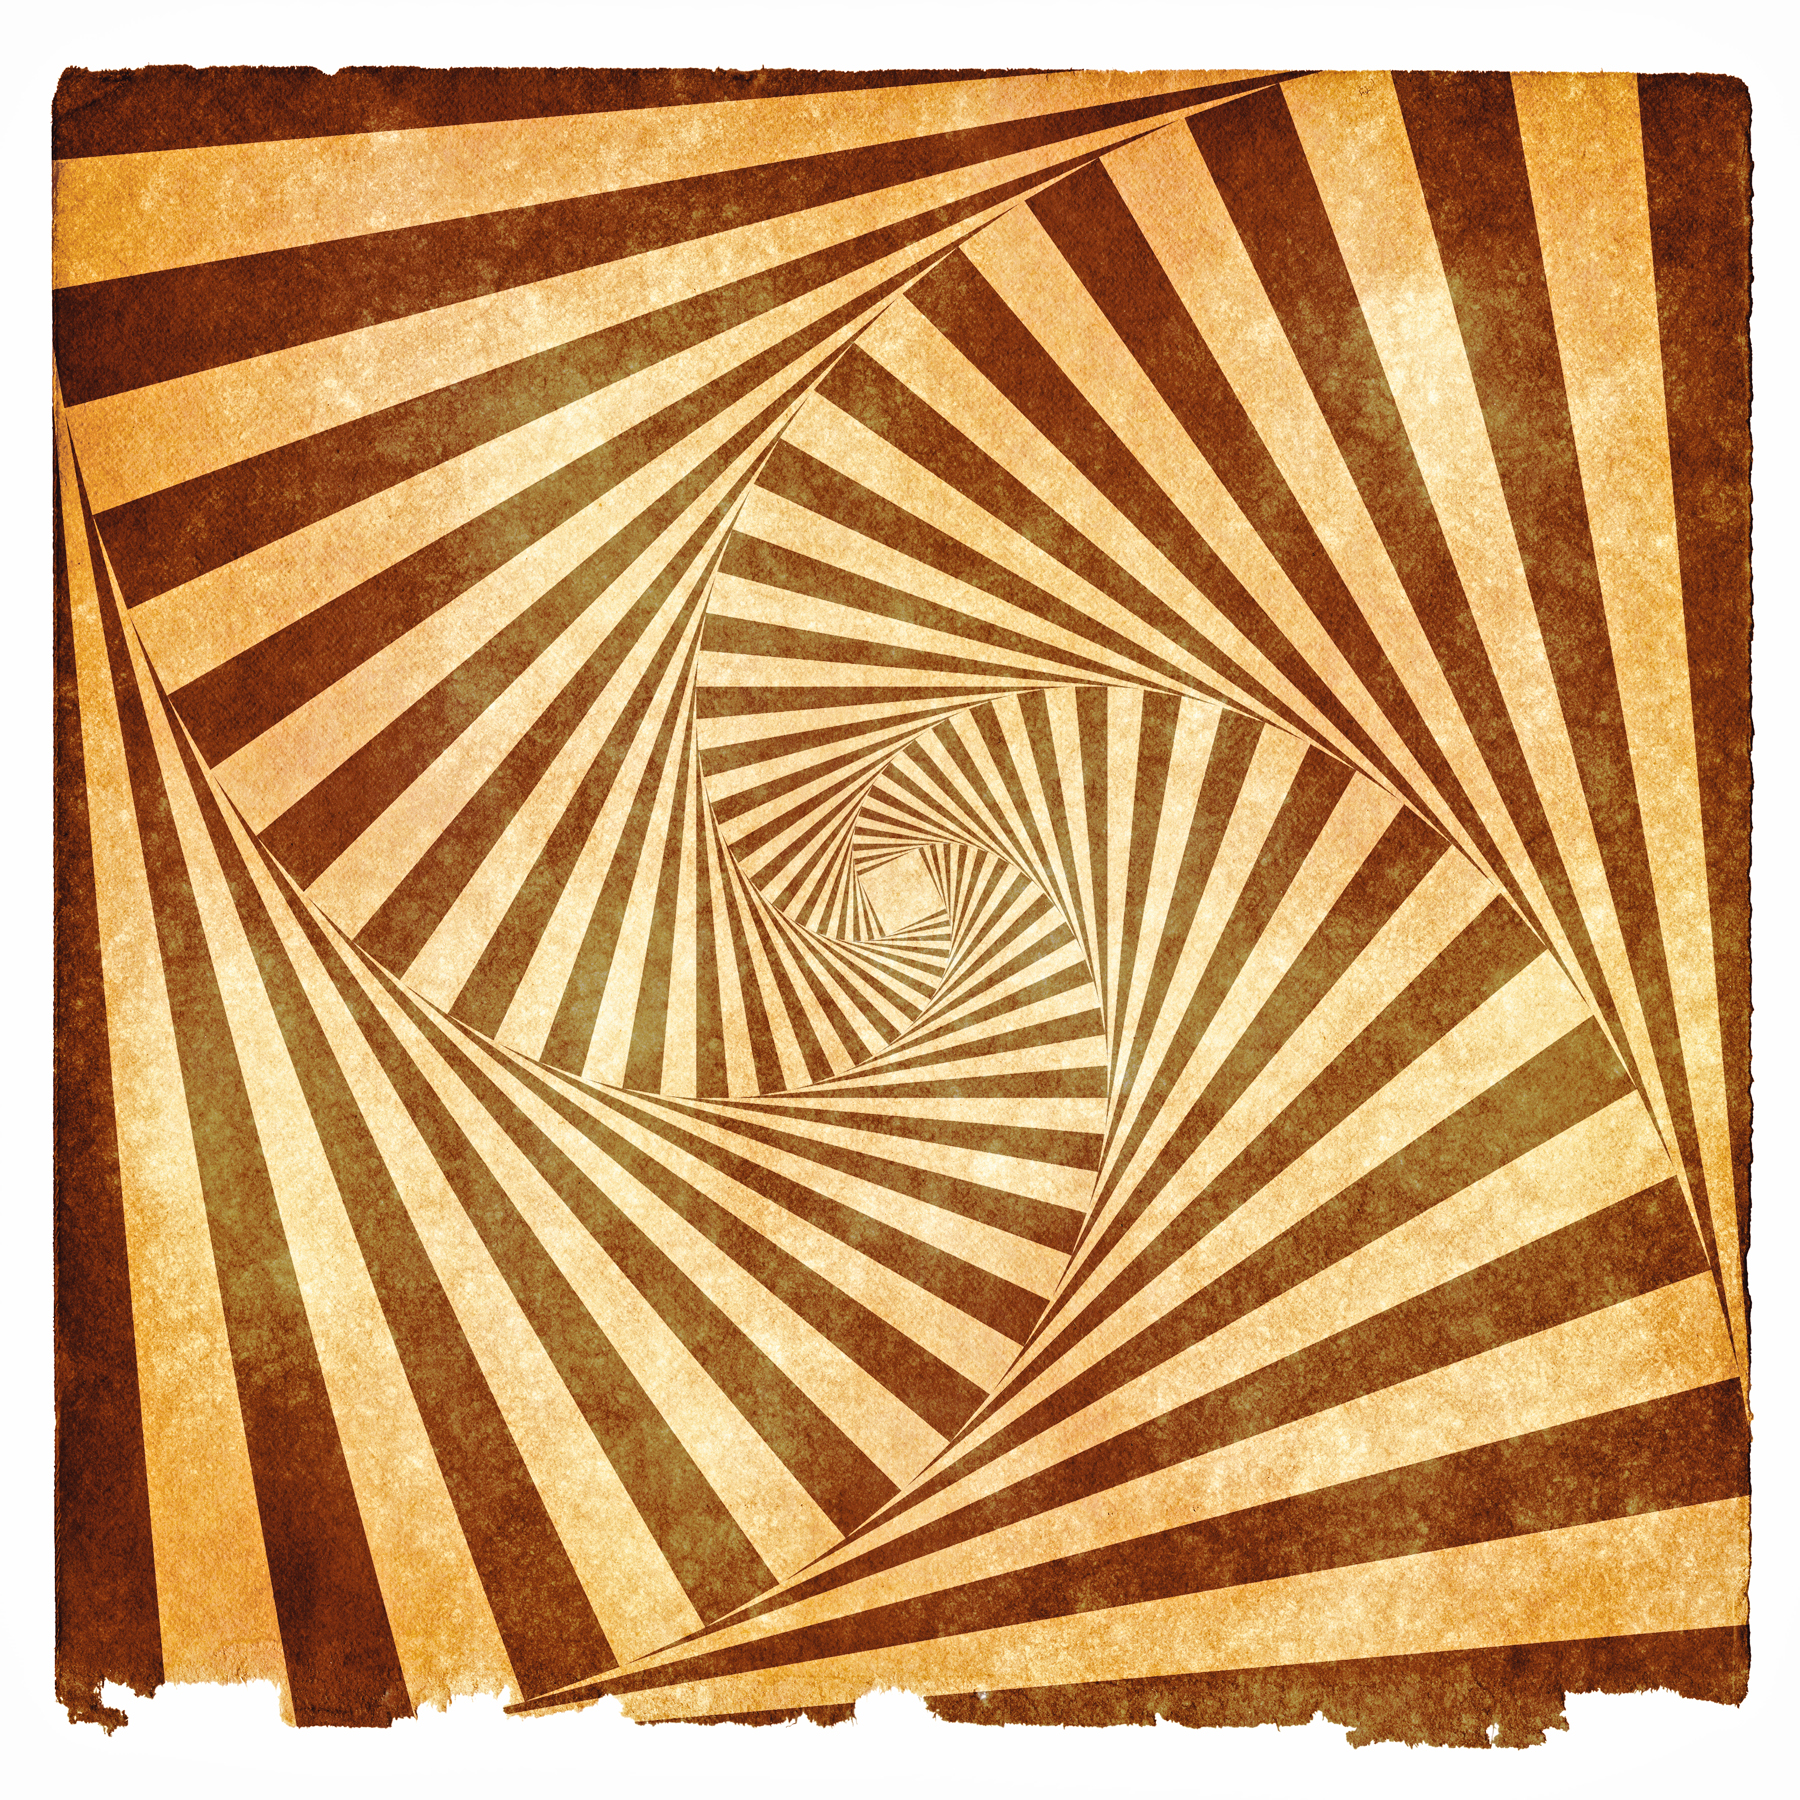 Spiral Tunnel Grunge - Sepia, Abstract, Picture, Rotations, Rotation, HQ Photo